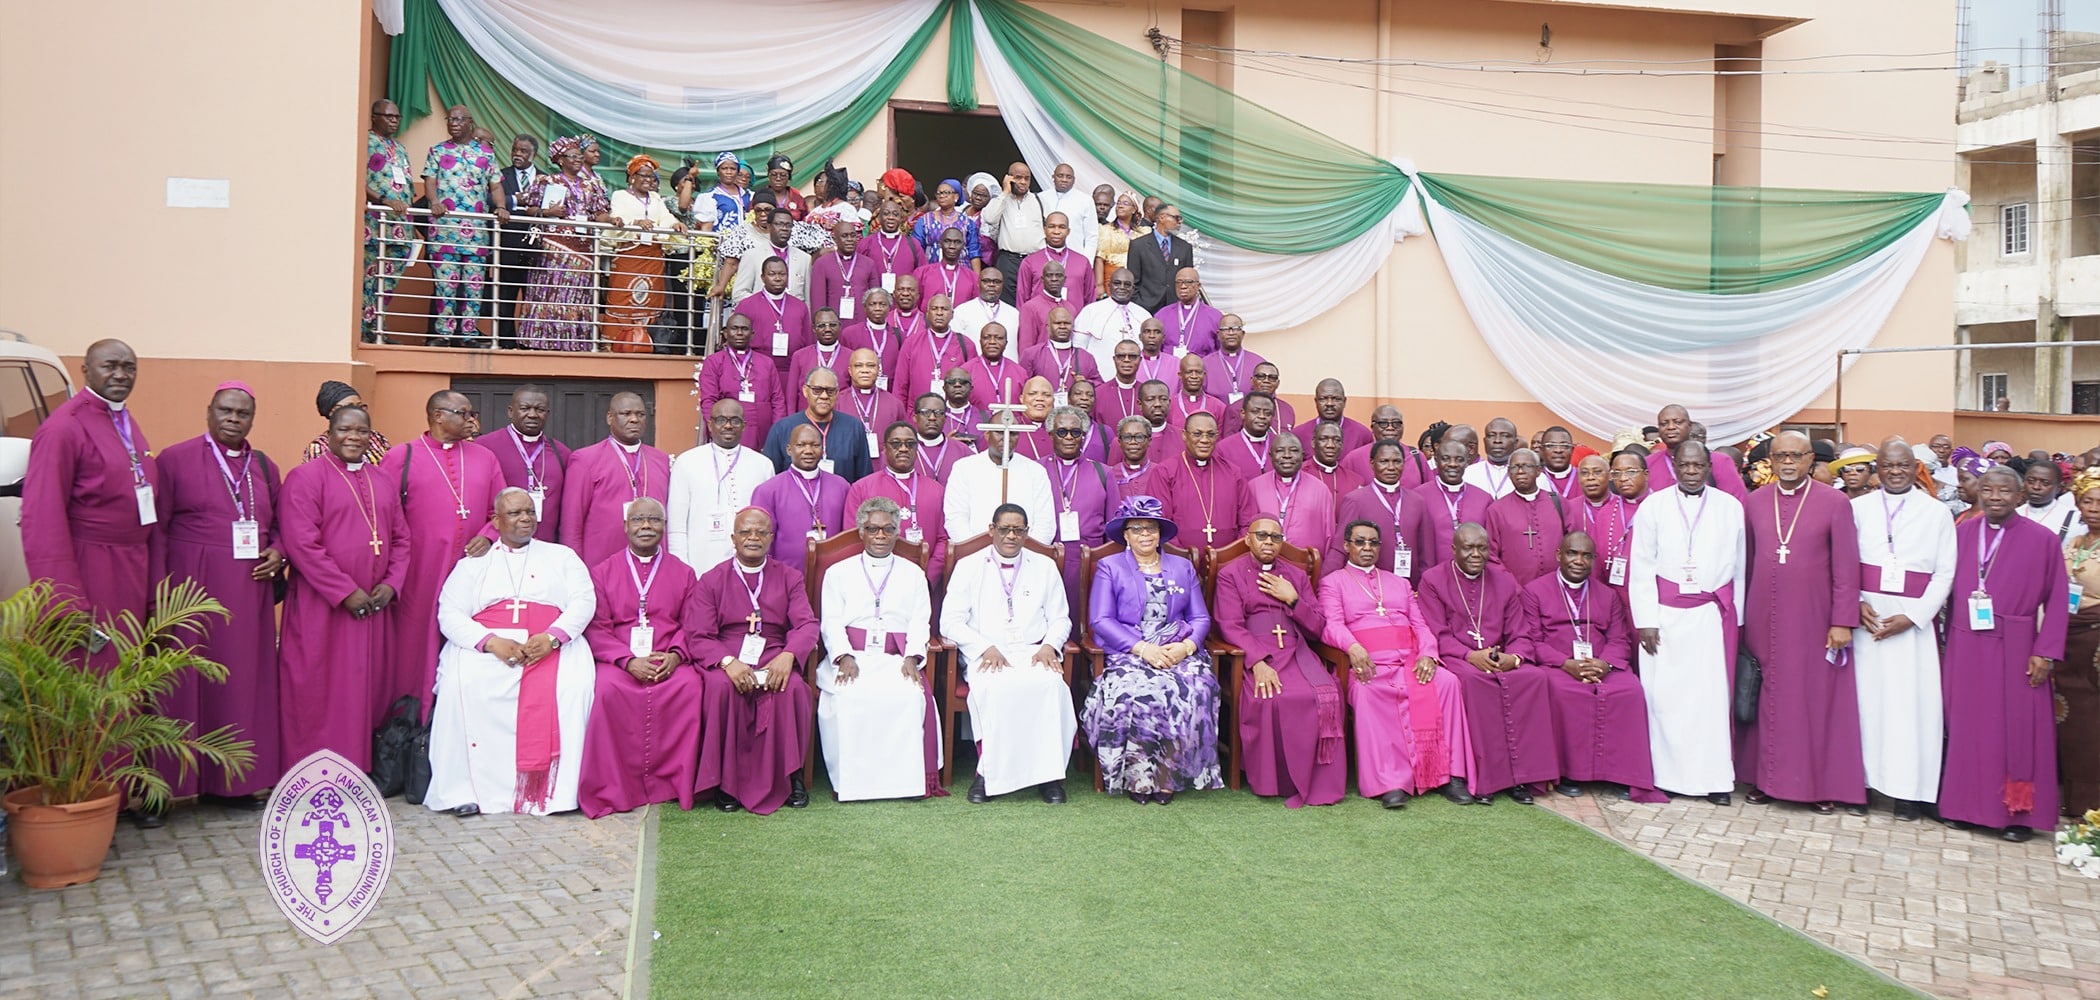 COMMUNIQUE: ISSUED AT THE END OF THE 14TH GENERAL SYNOD OF THE CHURCH OF NIGERIA (ANGLICAN COMMUNION).